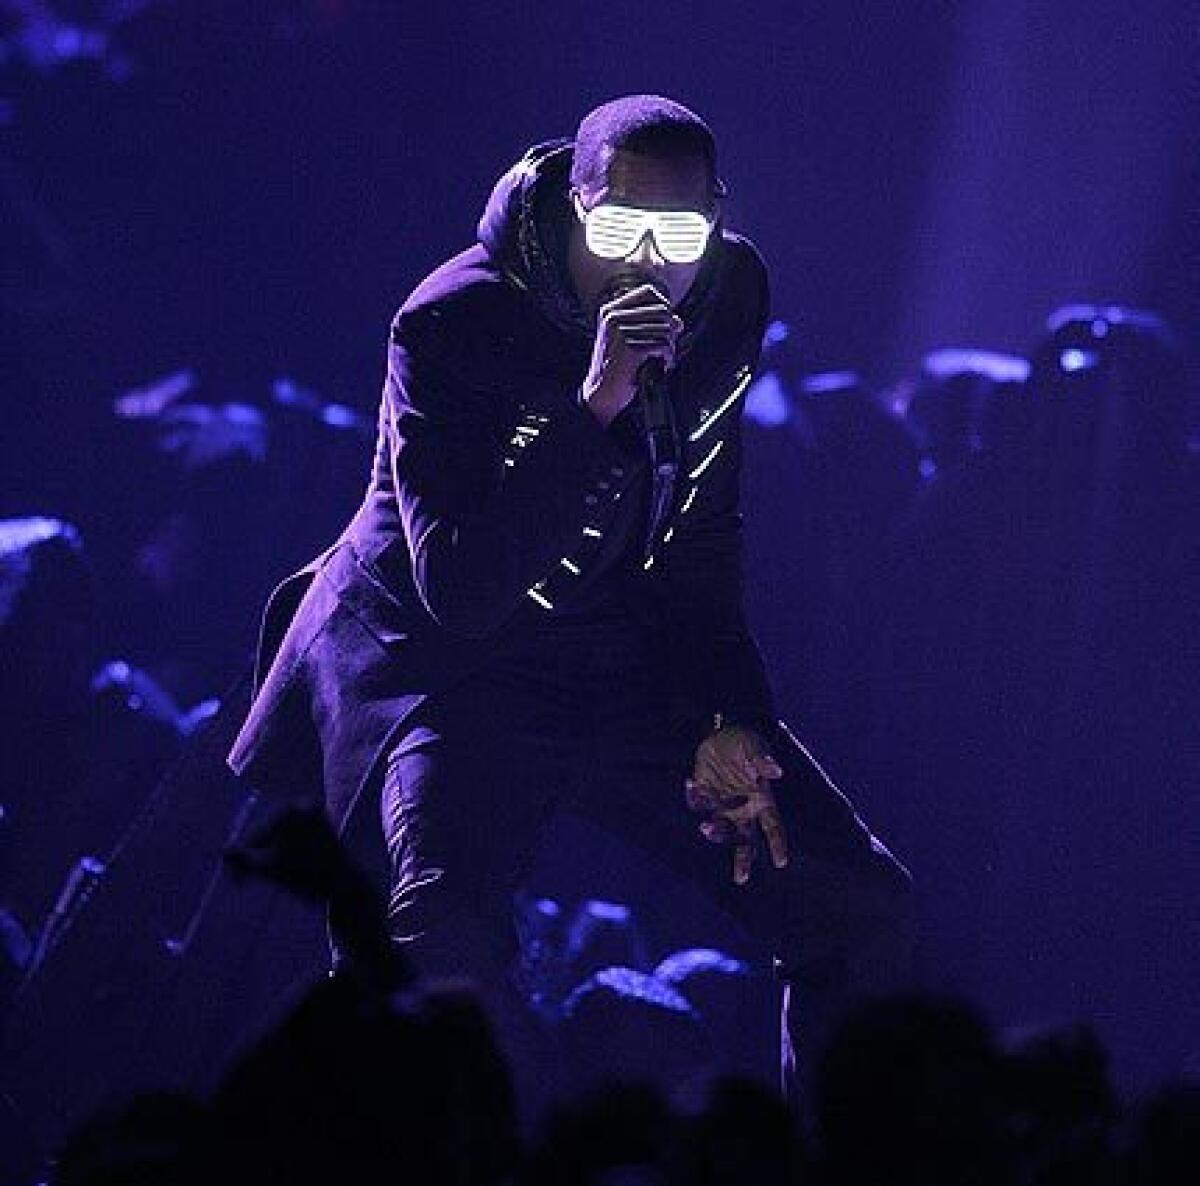 Kanye West performing with glow-in-the-dark shades on.